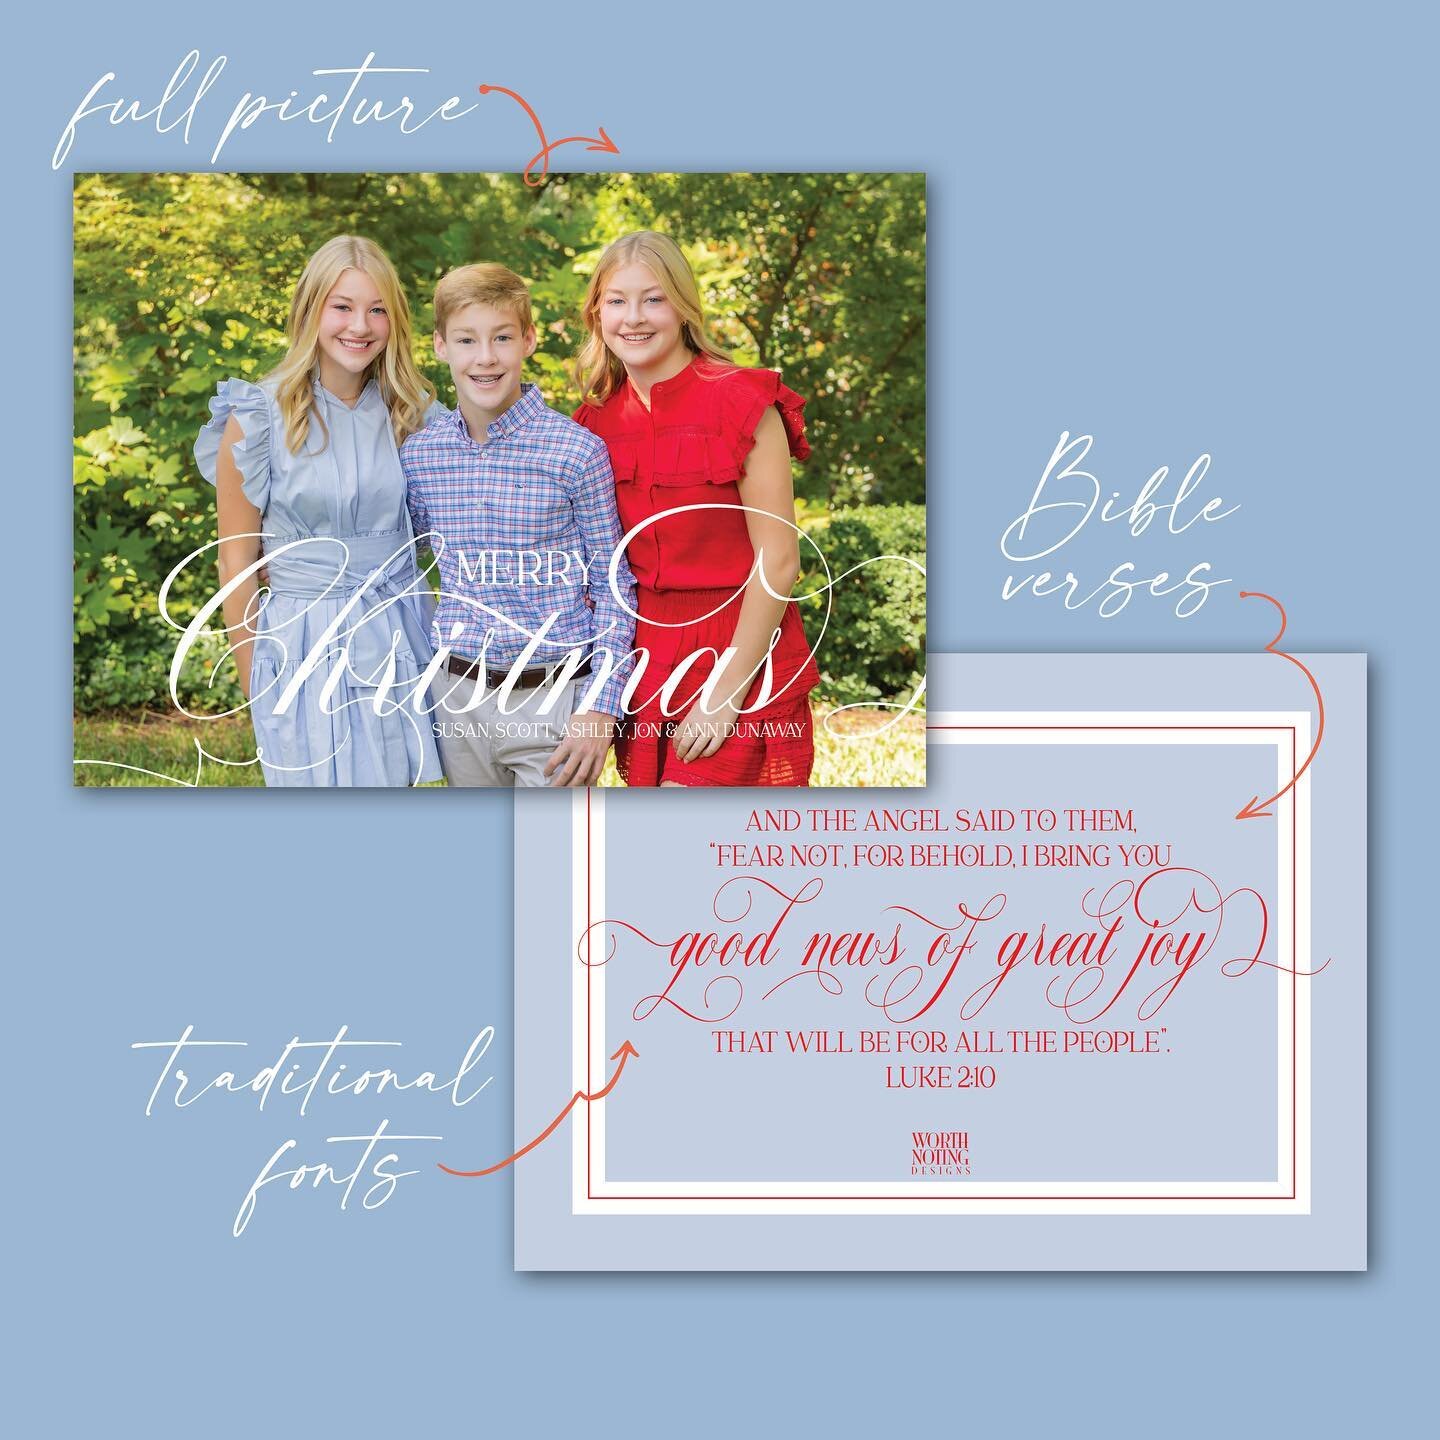 #itsworthnoting that traditional holiday cards are a beautiful way to spread cheer!  #customchristmascards